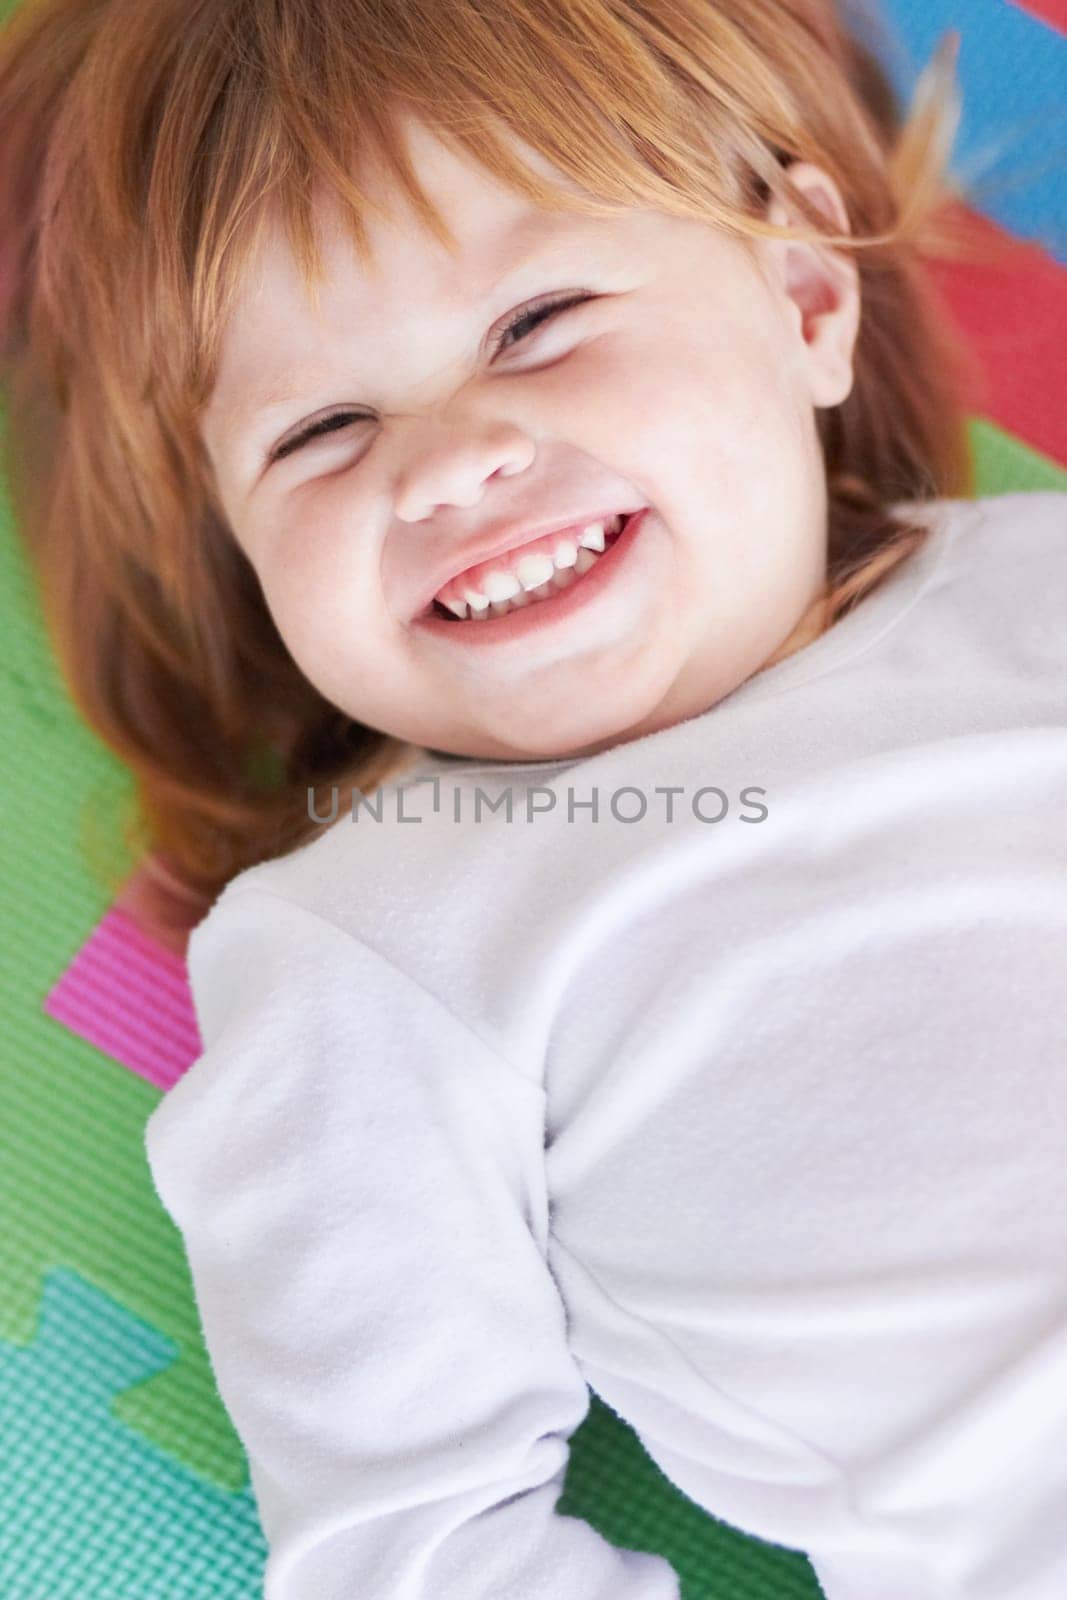 Young girl, laughing and happiness portrait of a baby on a home playpen ground with a smile. Ginger infant, kid laugh and happy in a house with joy, youth and positivity from childhood looking up.